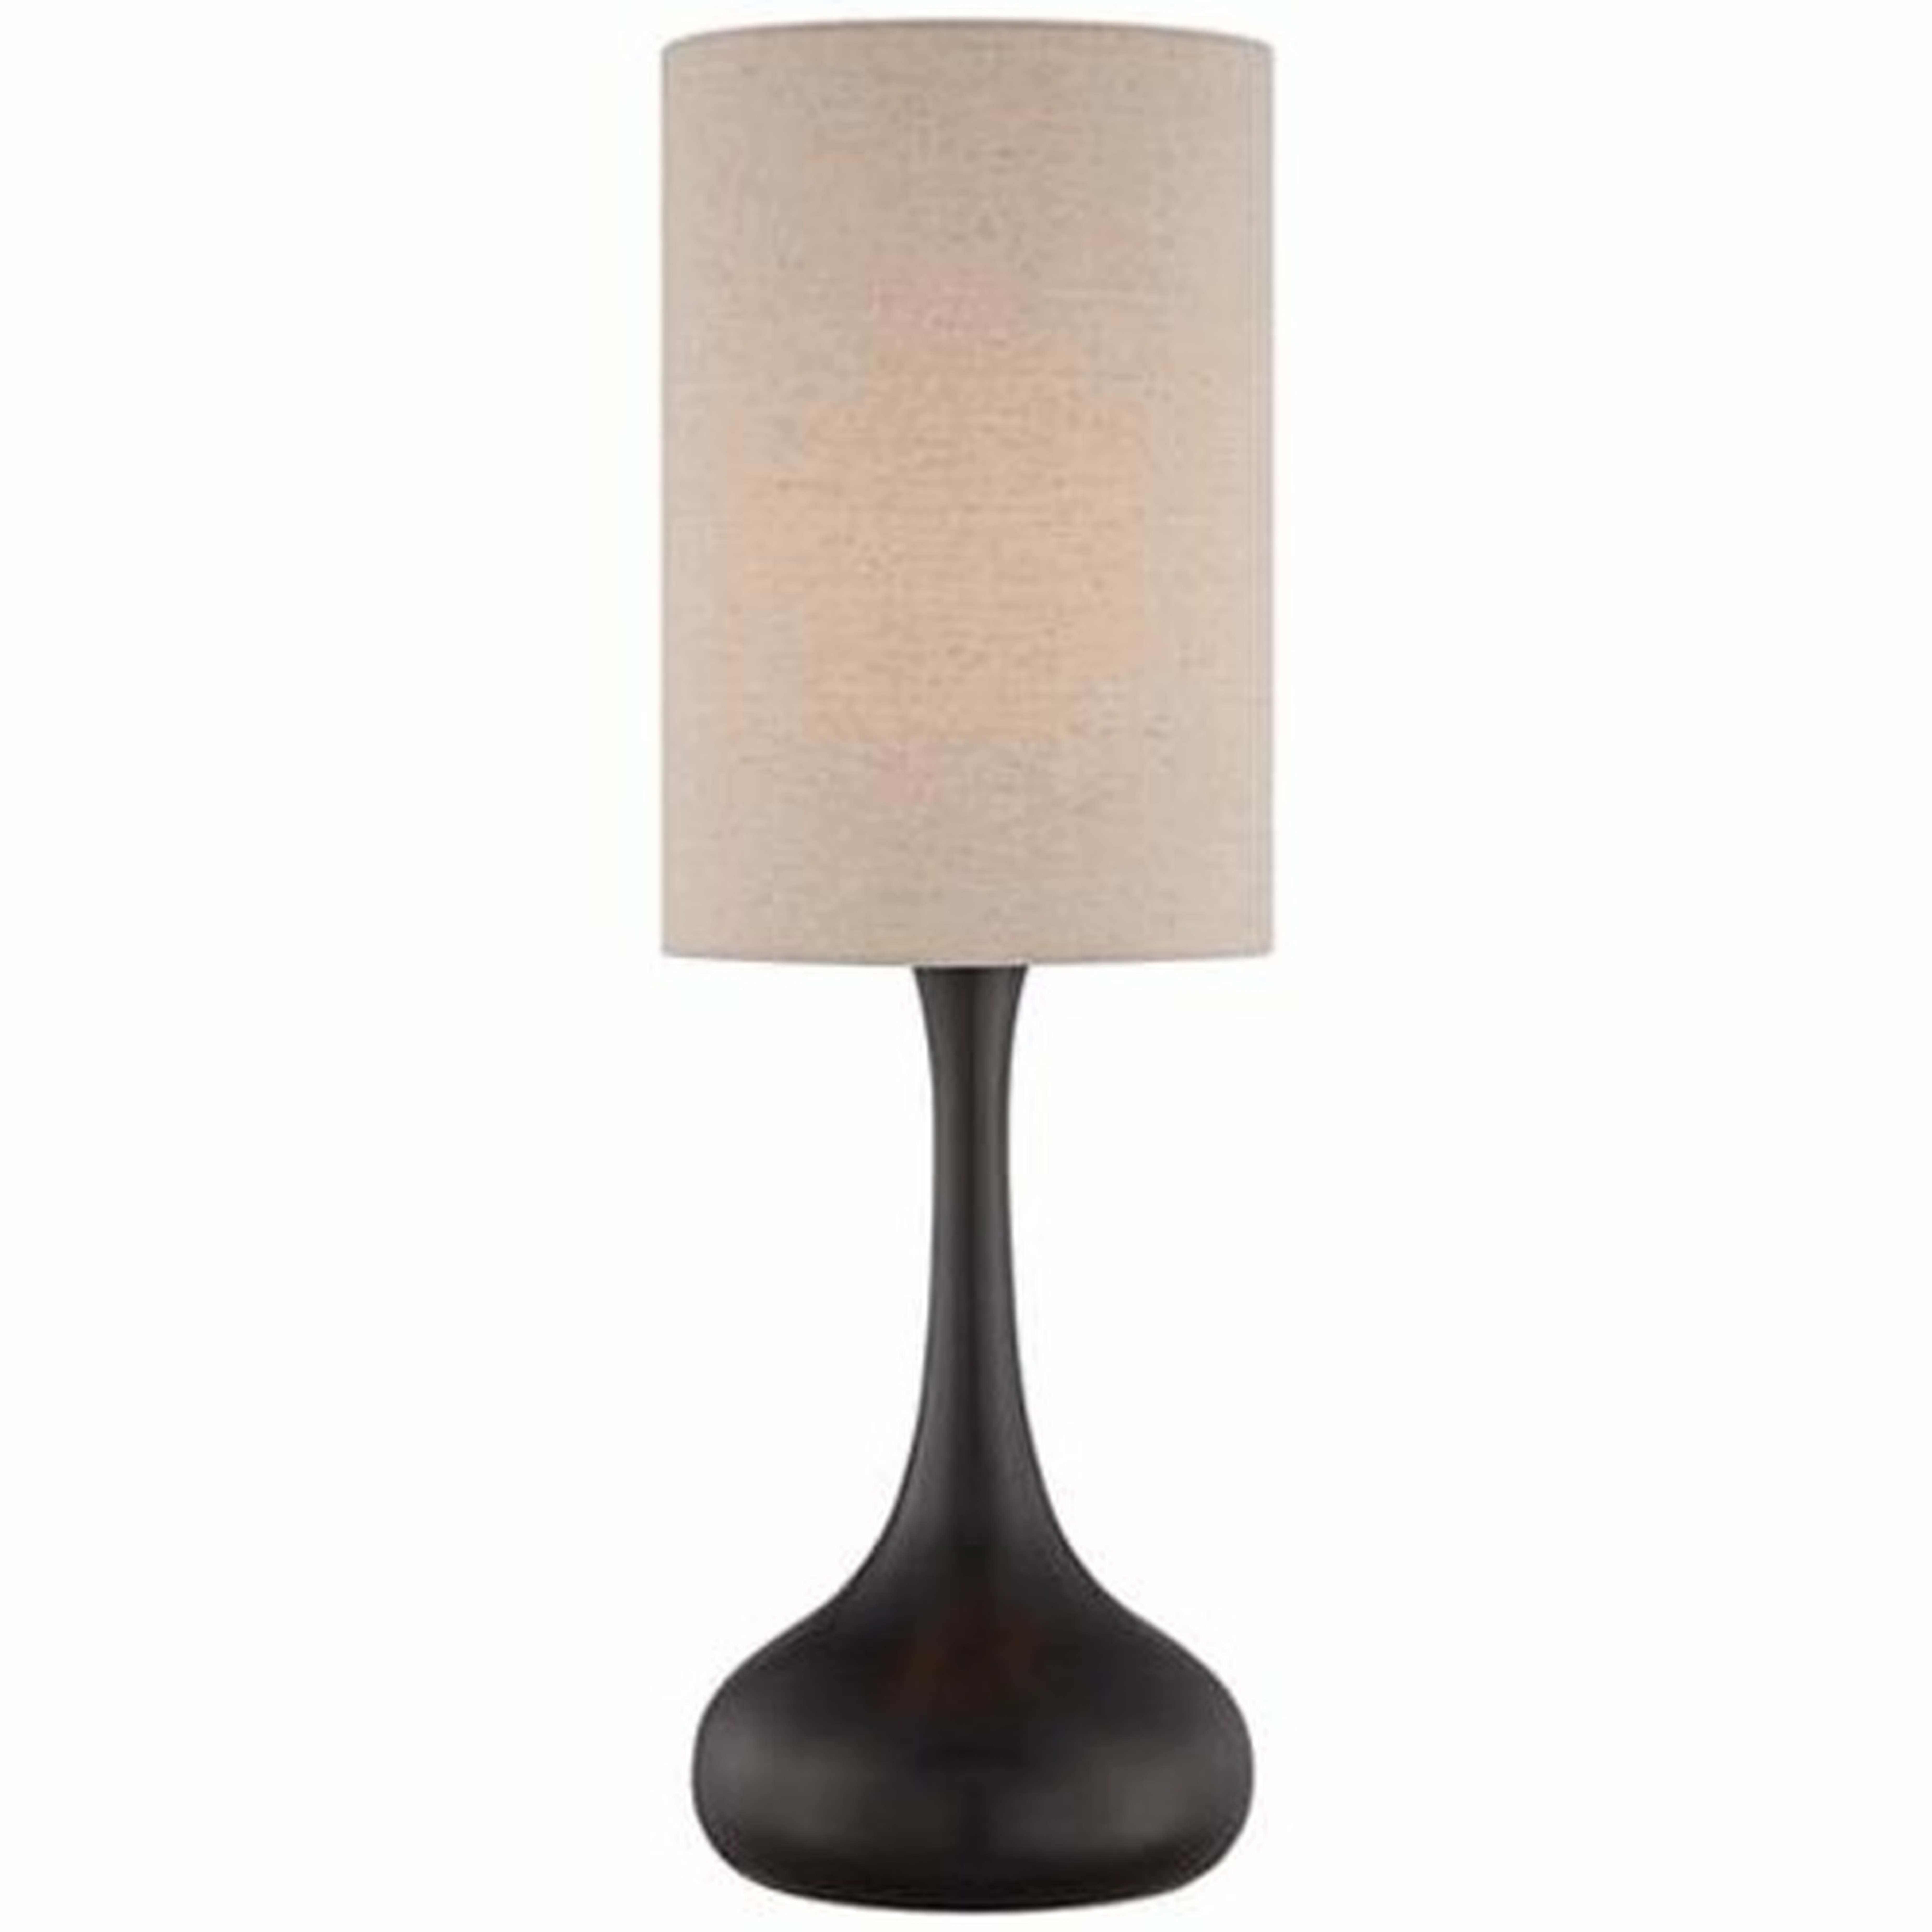 Droplet Table Lamp in Espresso Finish with Cylinder Shade - Lamps Plus